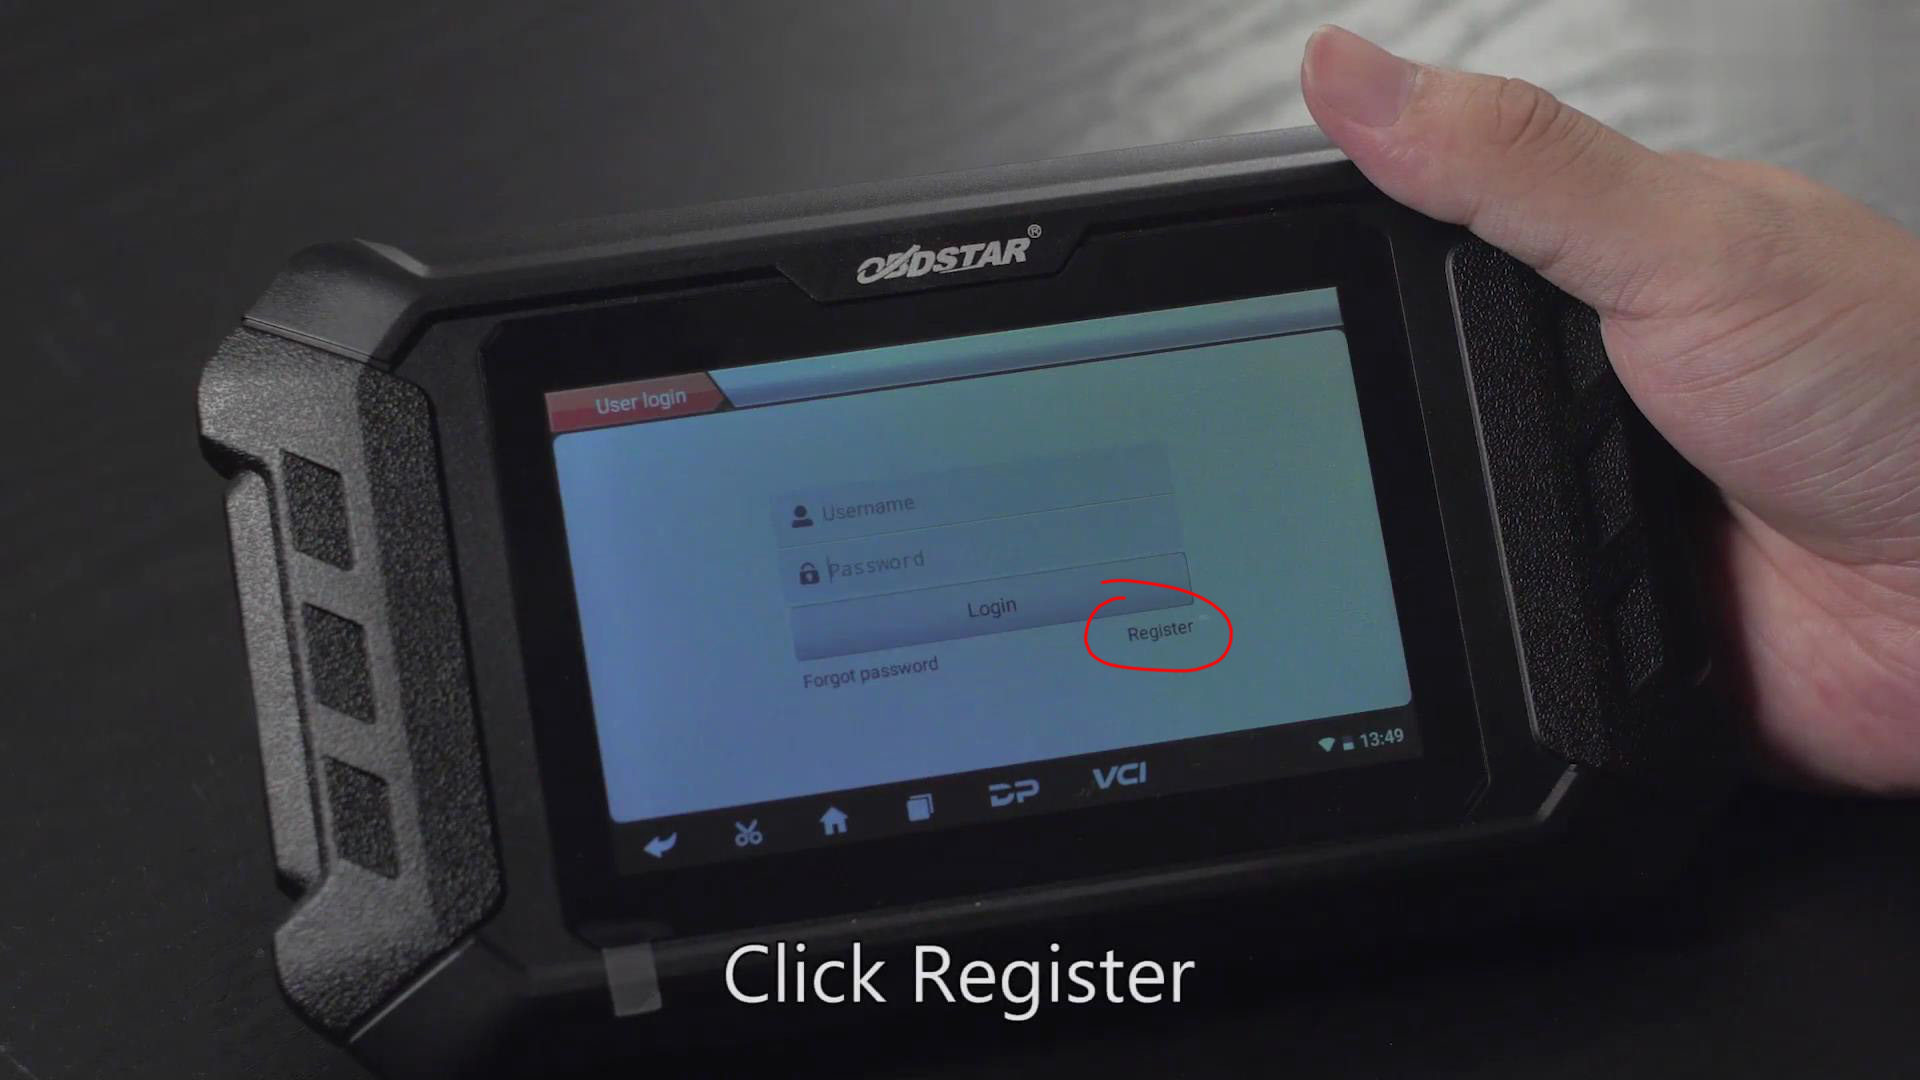 How-to-Register-&-Upgrade-Obdstar-X300-MINI-Scan-Tool-2